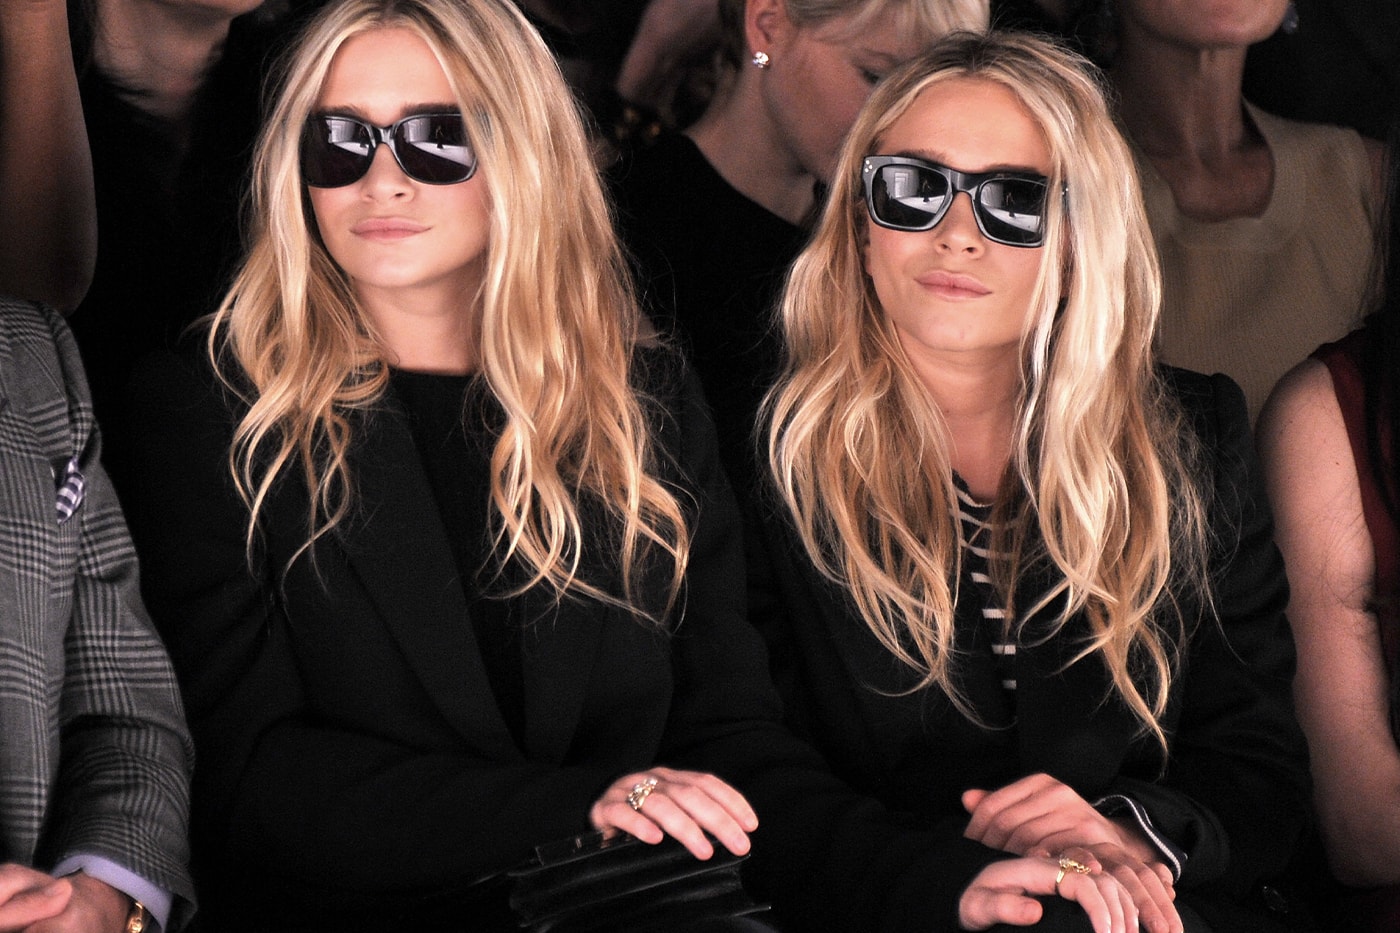 The Row's No Social Media Policy Has the Industry Nostalgic for Traditional Fashion Runways mary kate ashley olsen quiet luxury paris fashion week